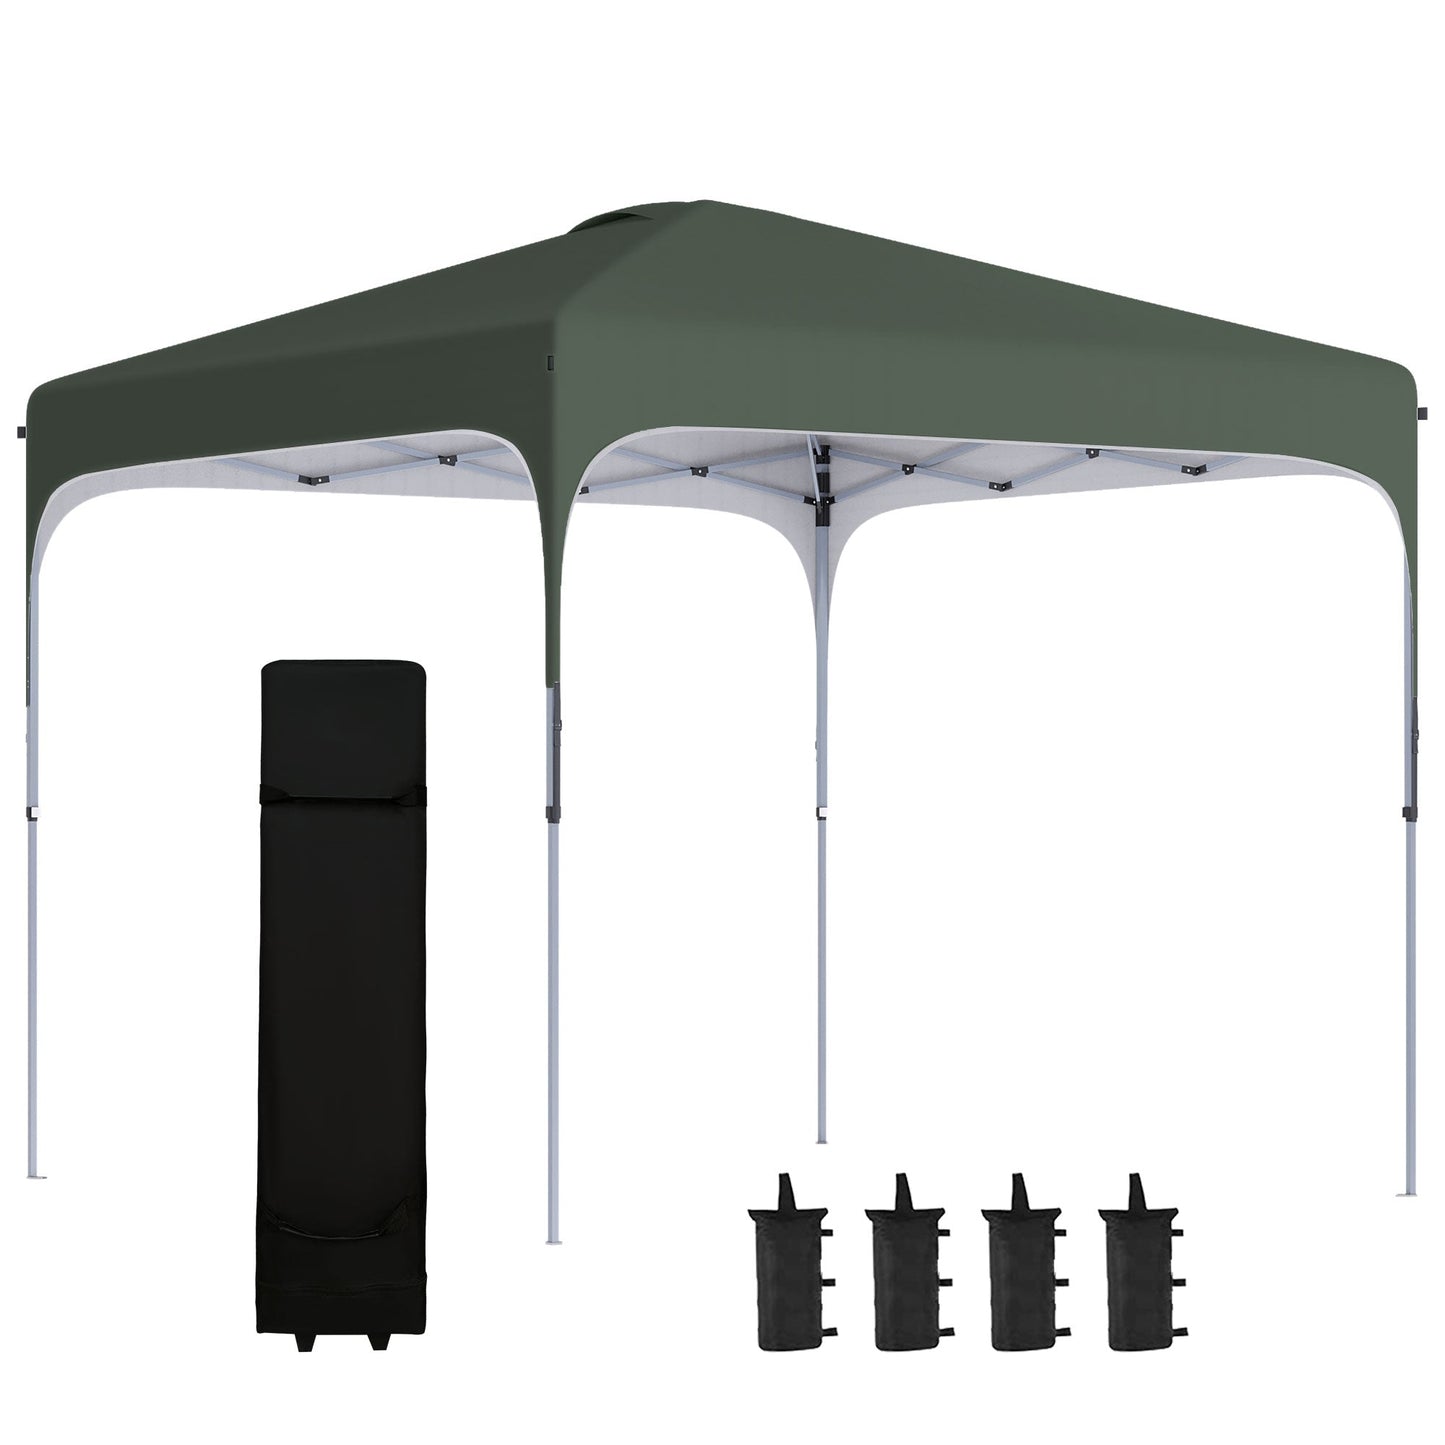 Outdoor and Garden-10' x 10' Pop Up Canopy with Adjustable Height, Foldable Gazebo Tent with Carry Bag with Wheels and 4 Leg Weight Bags for Outdoor - Outdoor Style Company